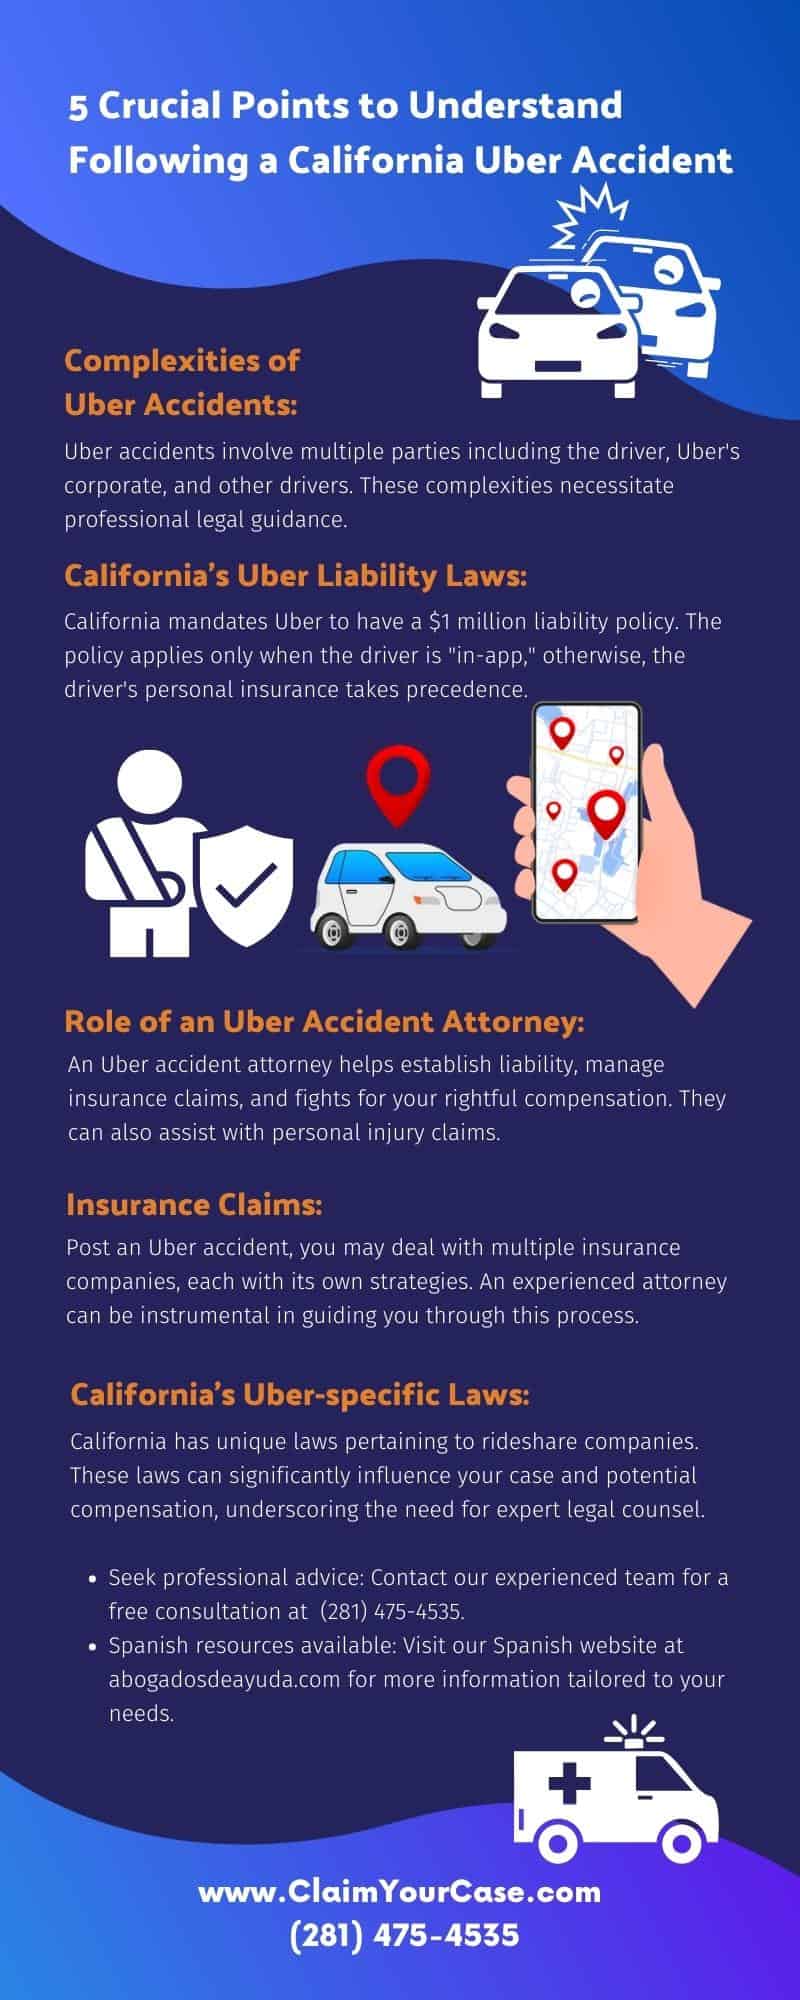 5 Crucial Points to Understand Following a California Uber Accident